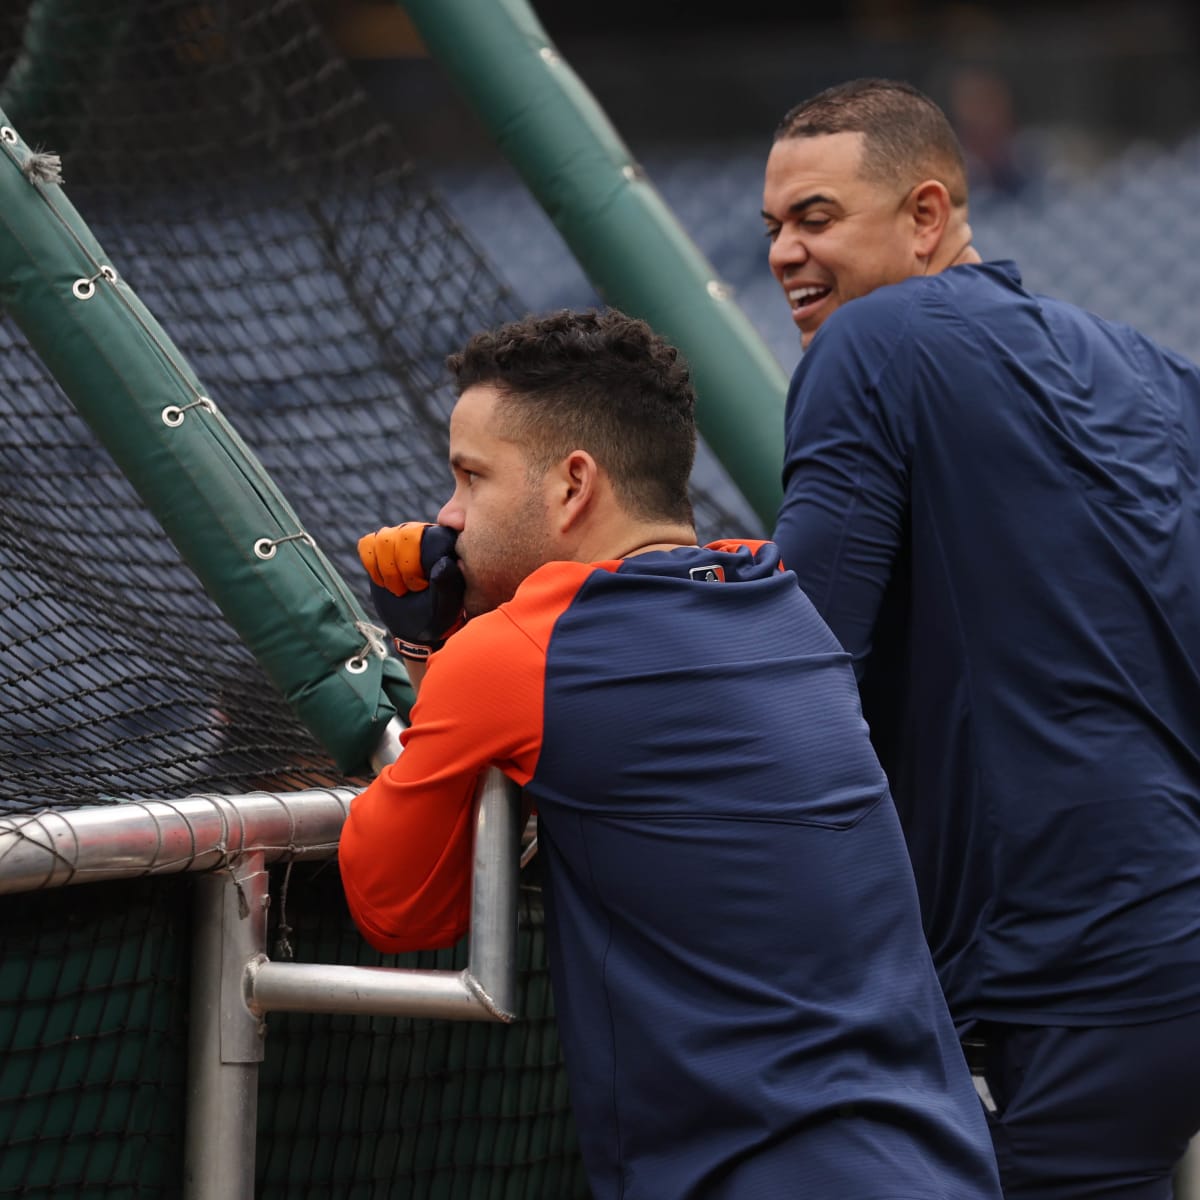 World Series schedule: Phillies vs. Astros Game 3 rained out – NBC